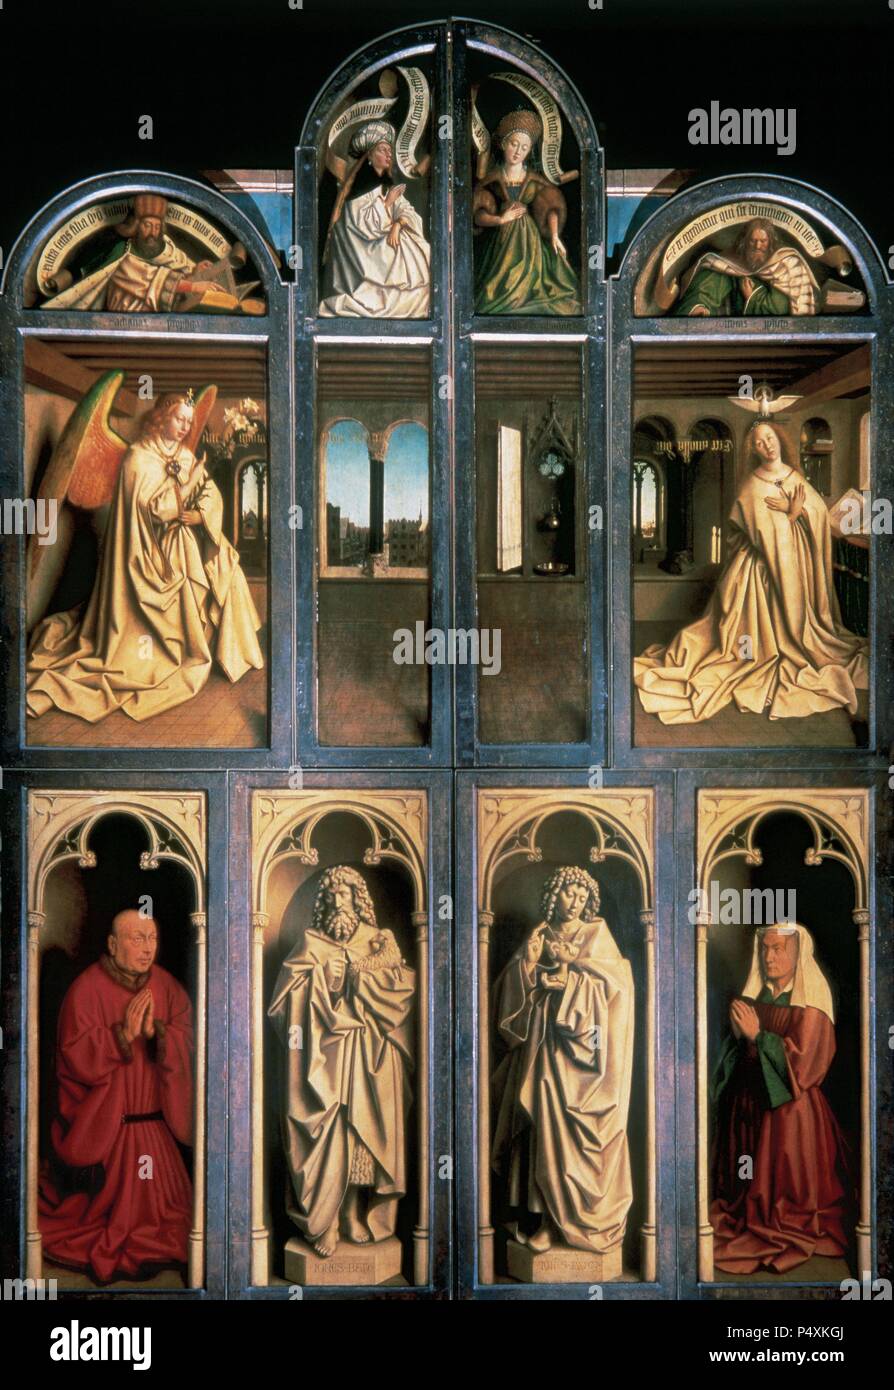 Gothic Art. Belgium. 15th Century. The Ghent Altarpiece, also known as The Adoration of the Mystic Lamb or The Lamb of God. Early Flemish polyptych panel painting. Commisioned from Hubert van Eyck (1385/90-1426) and executed by his brother Jan van Eyck (c.1390-c.1441), 1430-32. Closed view. Prophets, Sibyls, an annunciation scene, donors and Saints. Oil on oak. Saint Bavo Cathedral. Ghent. Stock Photo